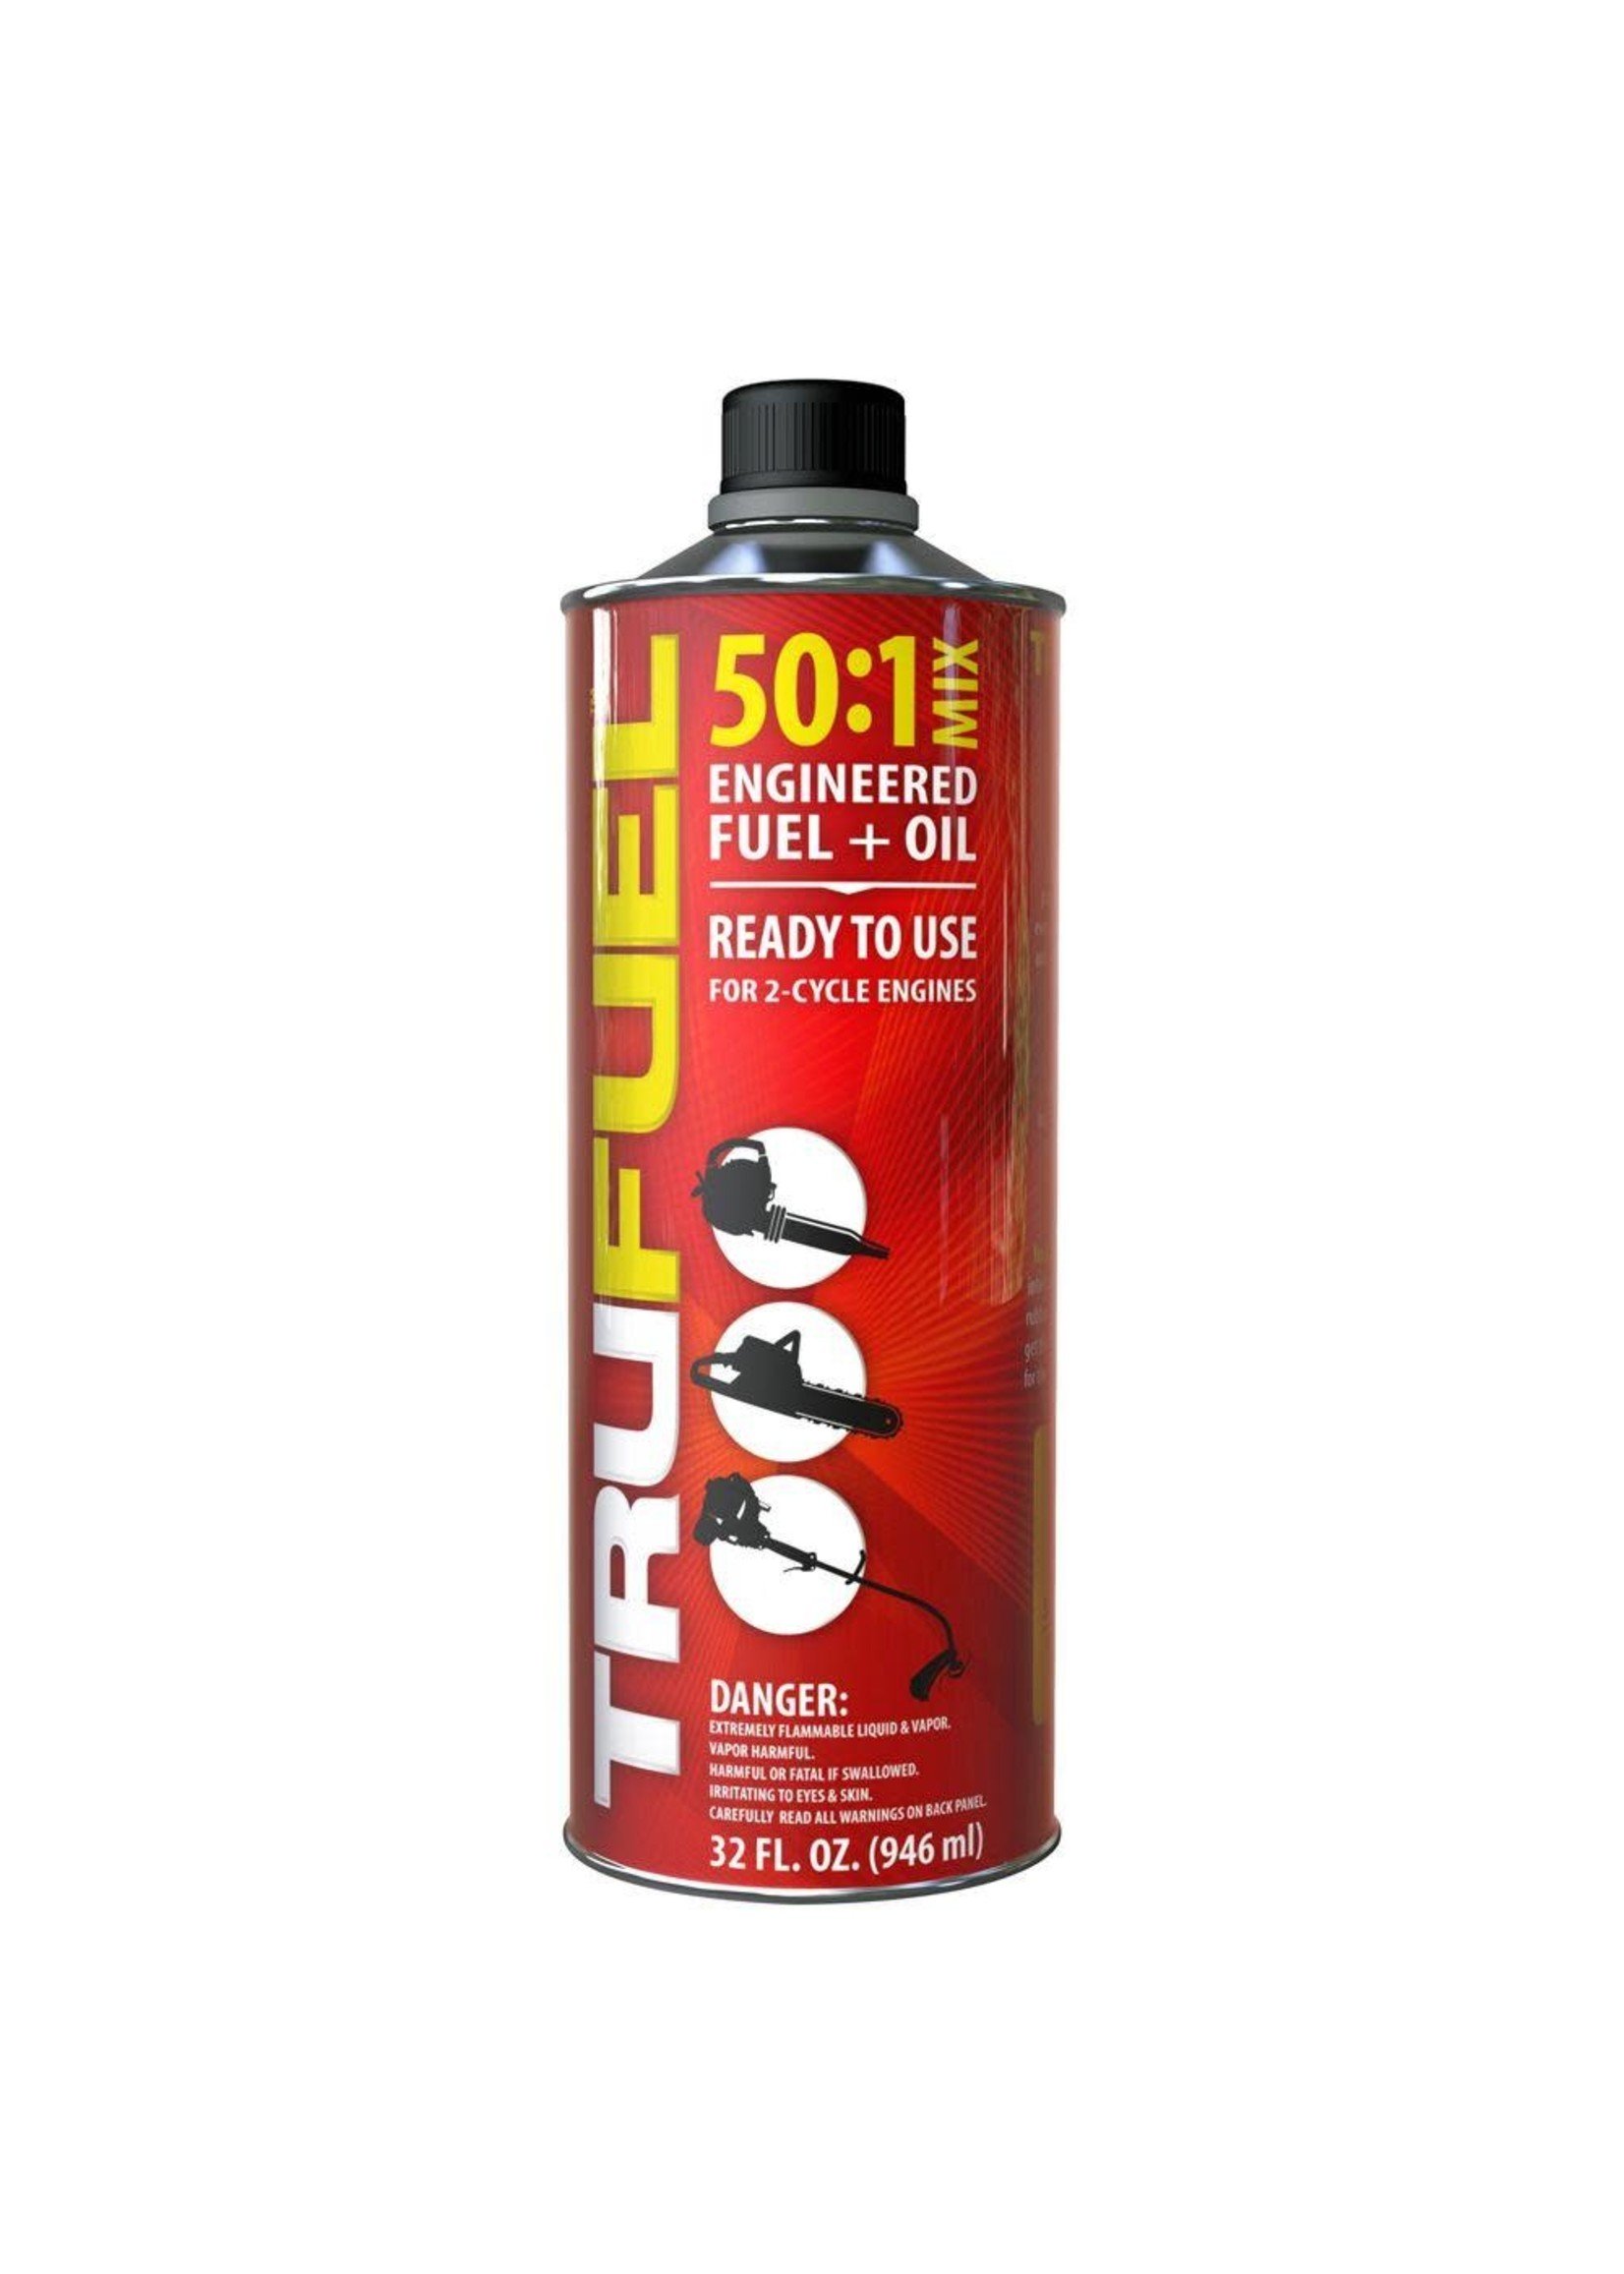 Trufuel 50:1 Pre-mixed Fuel + Oil